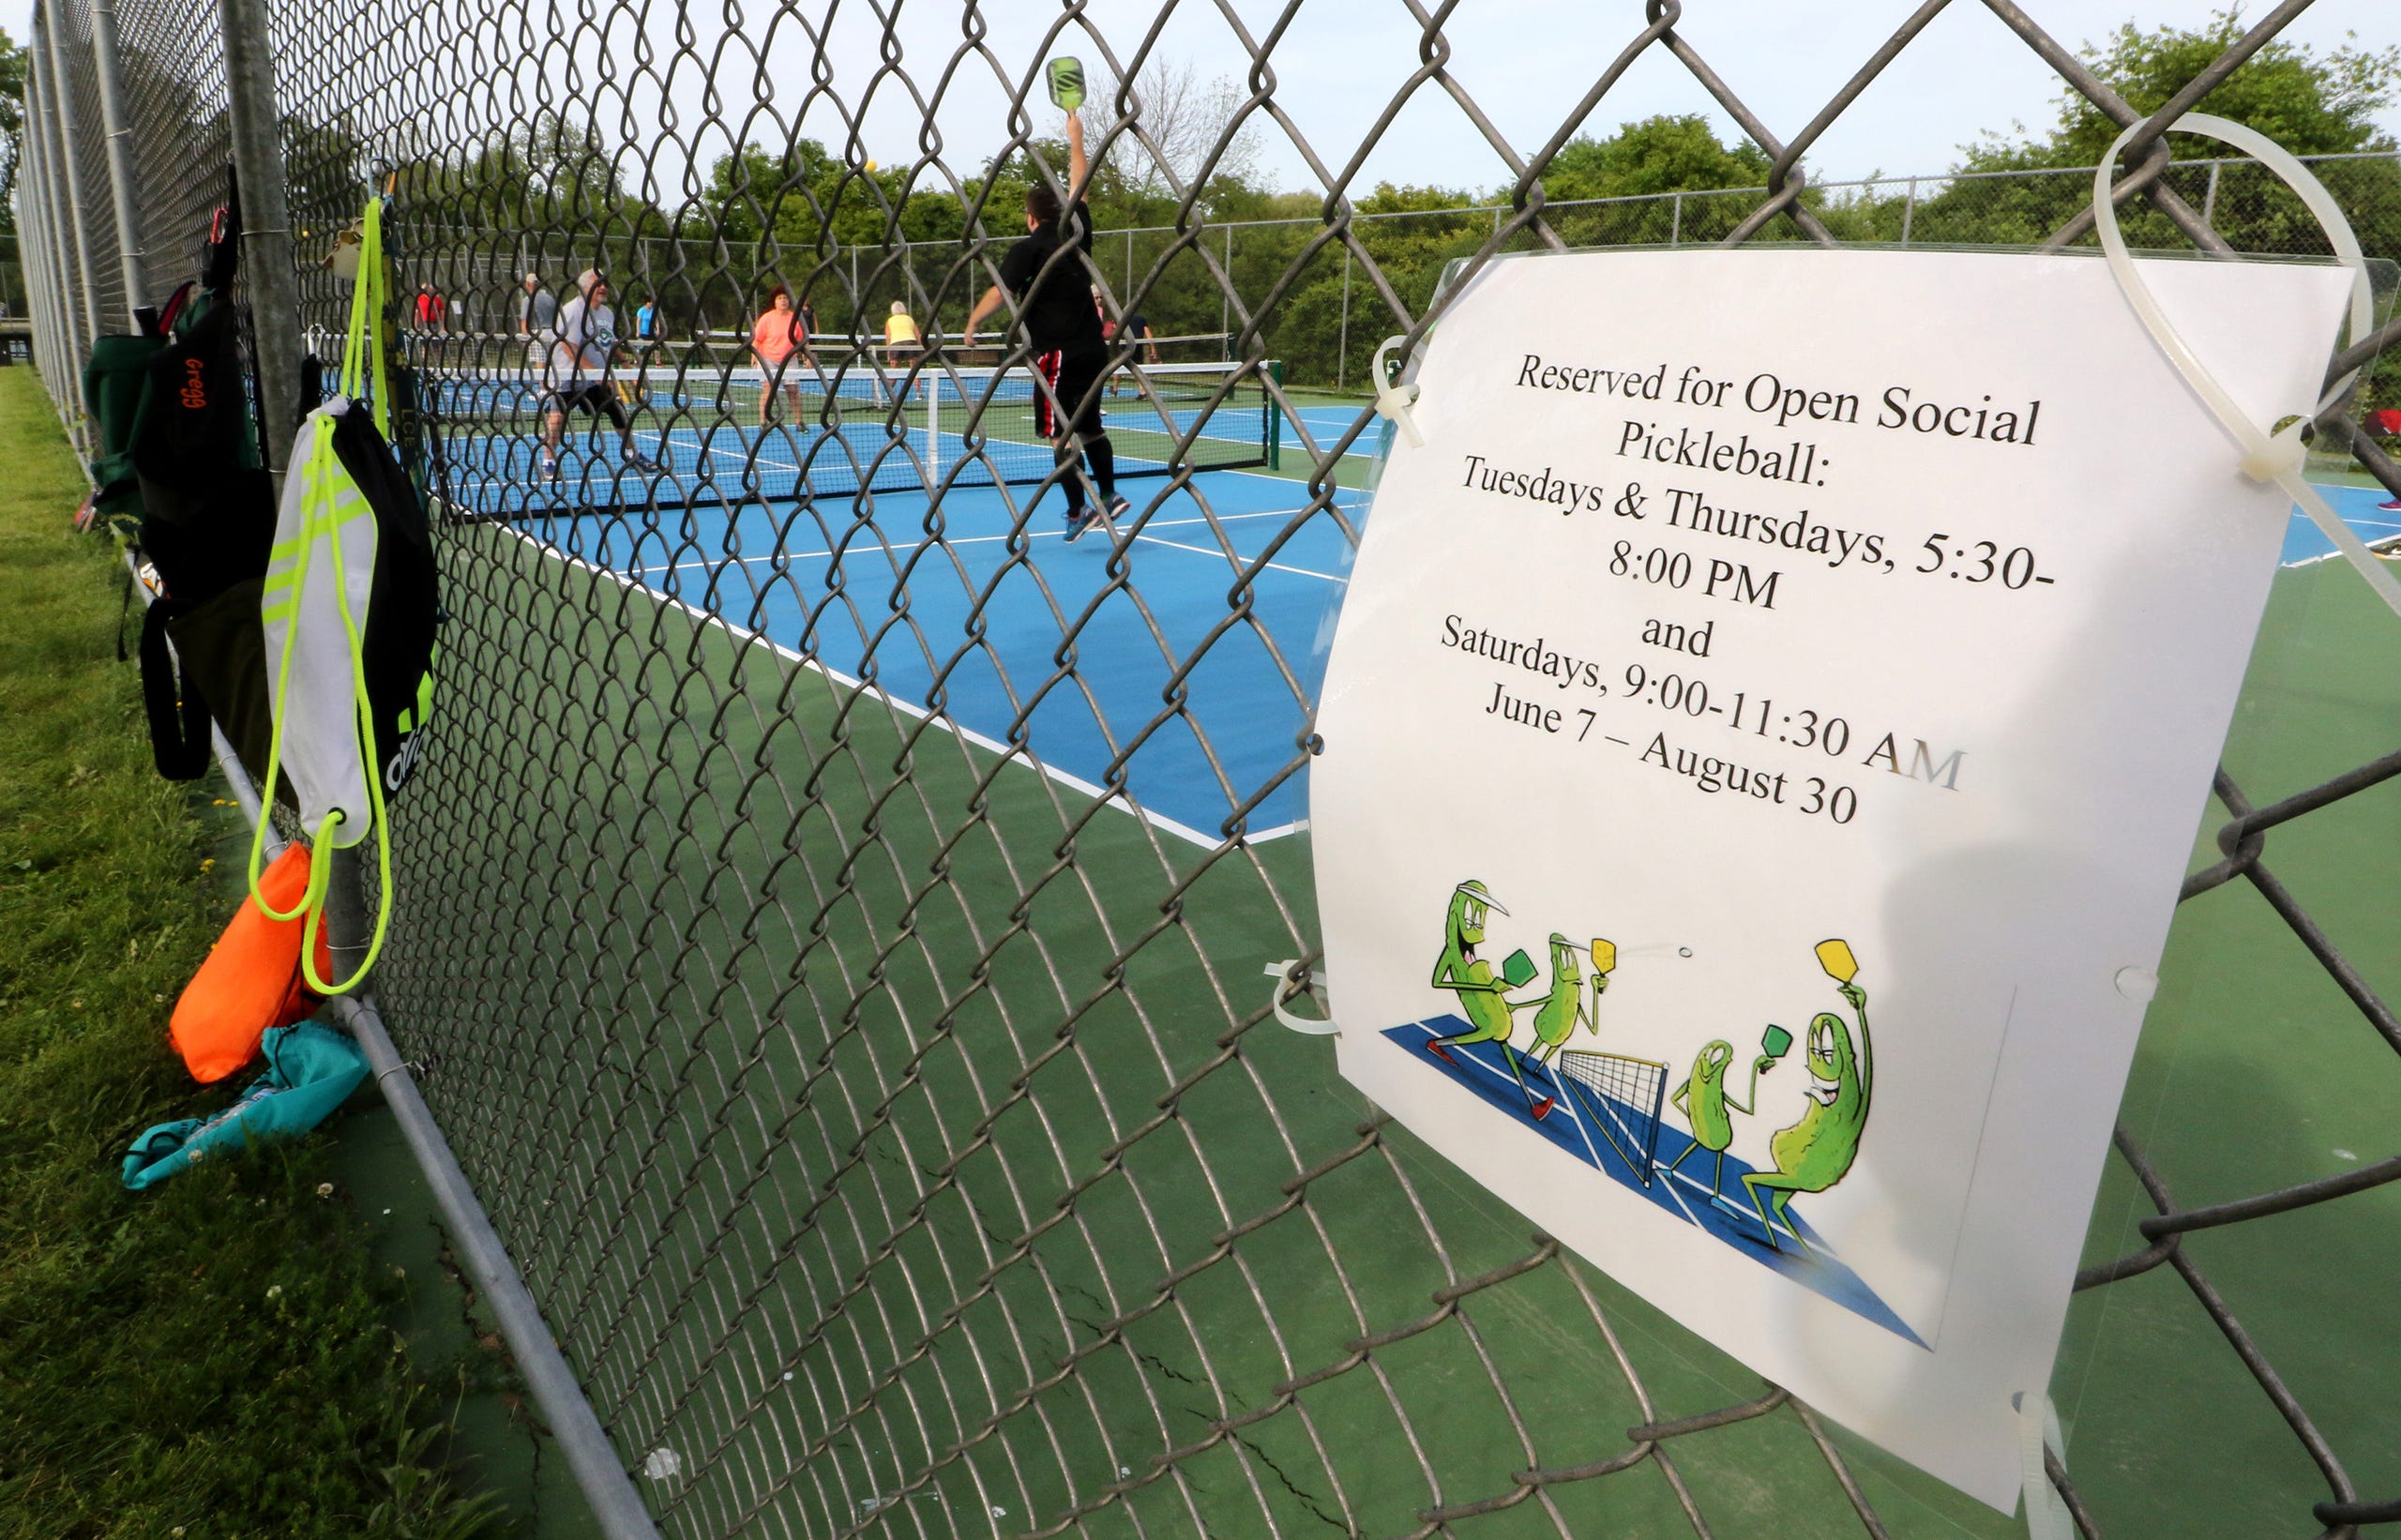 A sign on the fence reserves the court for Open Social Pickleball play at Franklin's Lion's Legend Park II on Drexel Road.